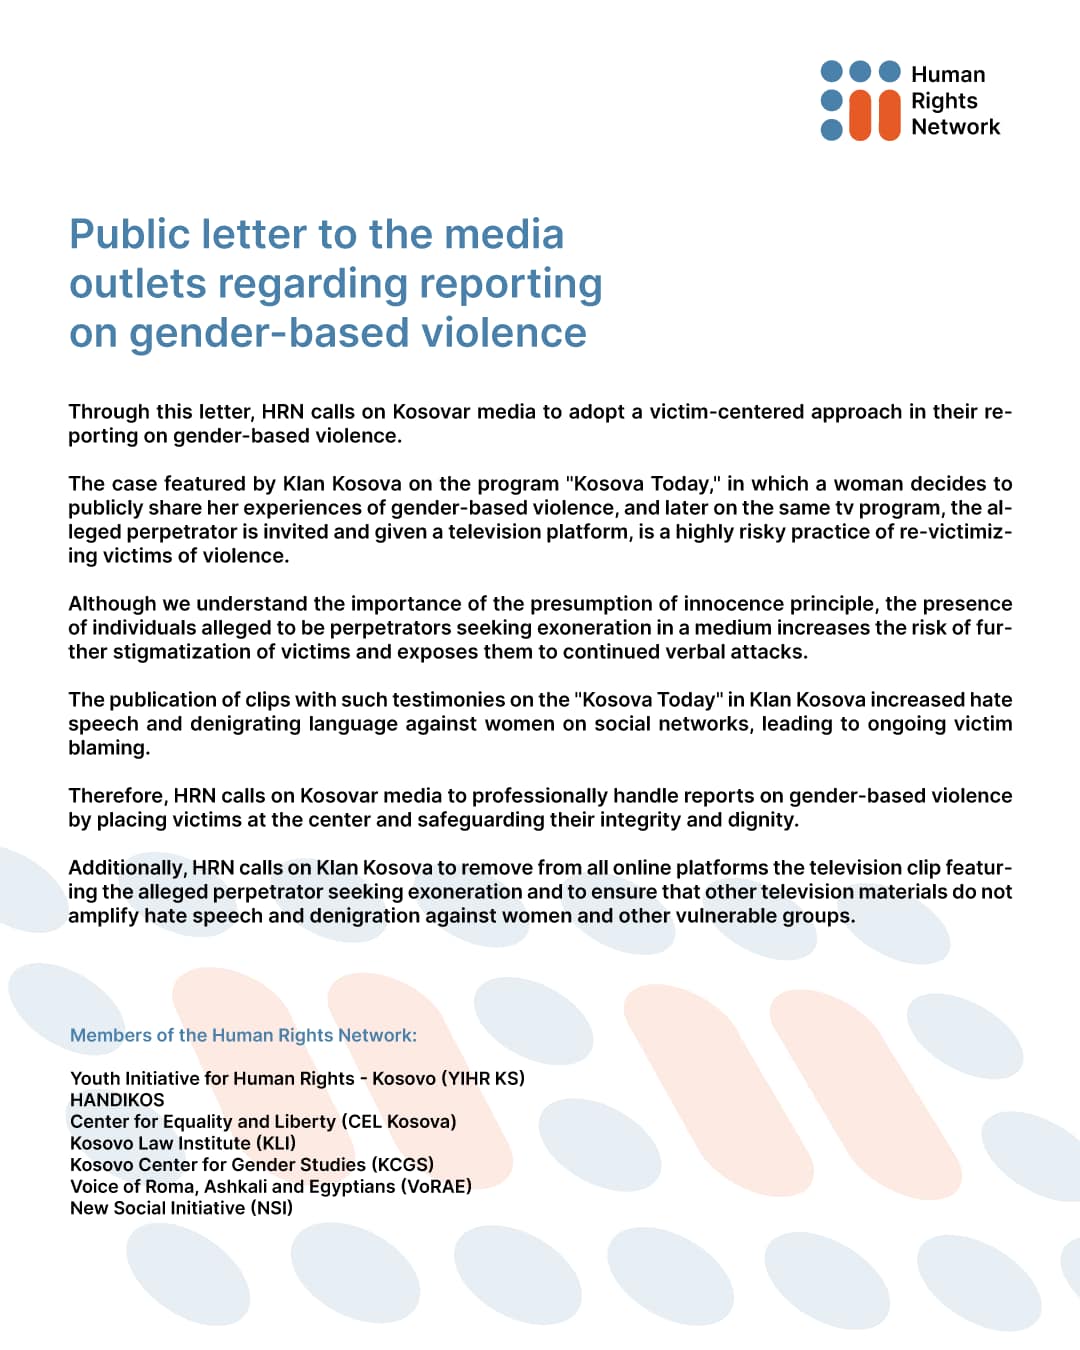 Public letter to the media outlets regarding reporting on gender-based violence